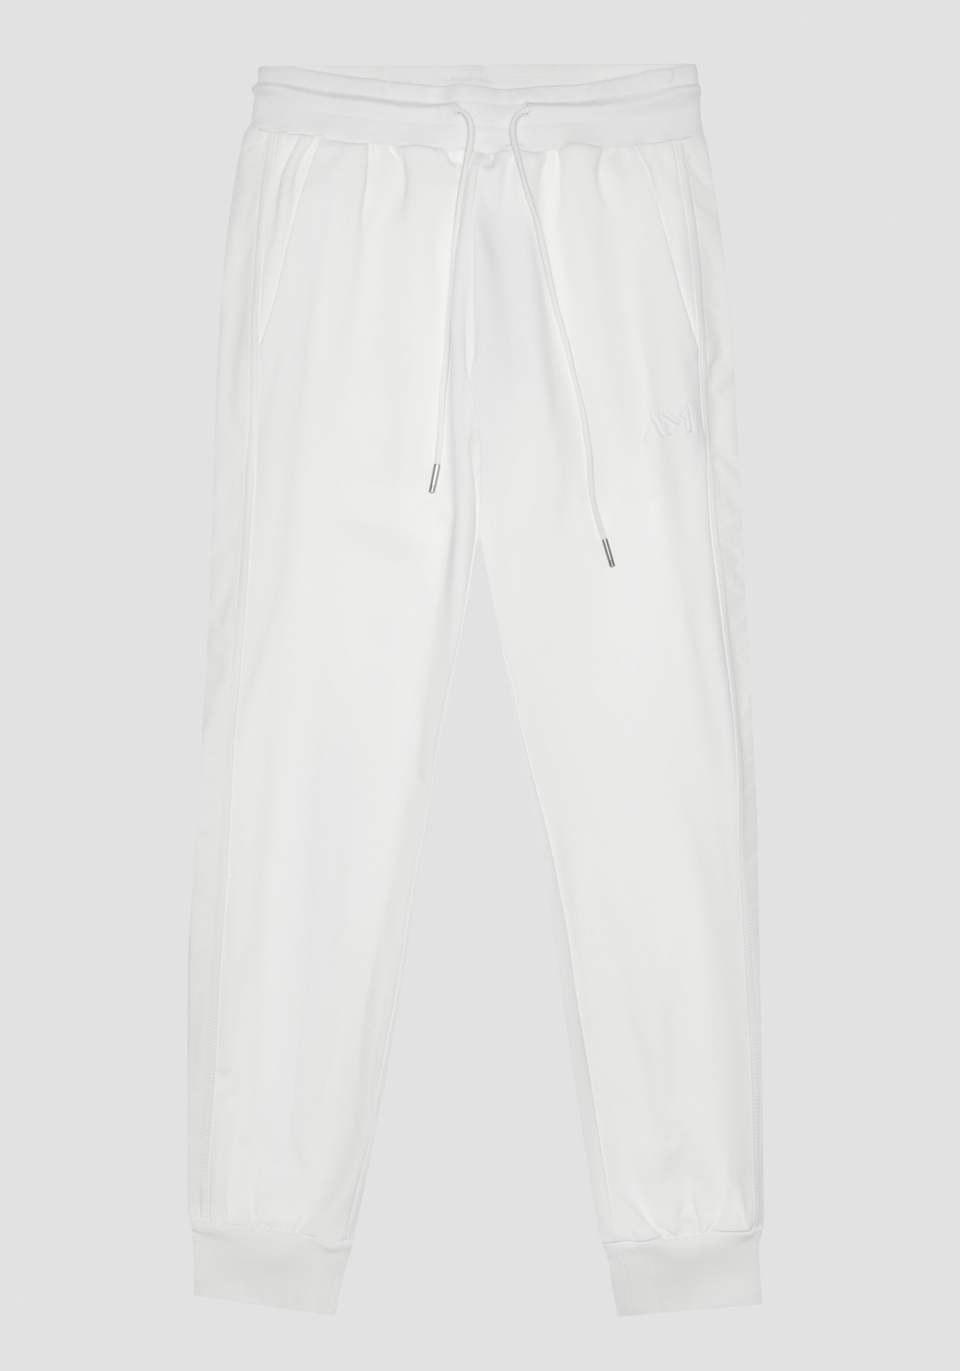 SLIM FIT SWEATPANTS IN SUSTAINABLE COTTON-POLYESTER BLEND WITH EMBROIDERED LOGO - Antony Morato Online Shop